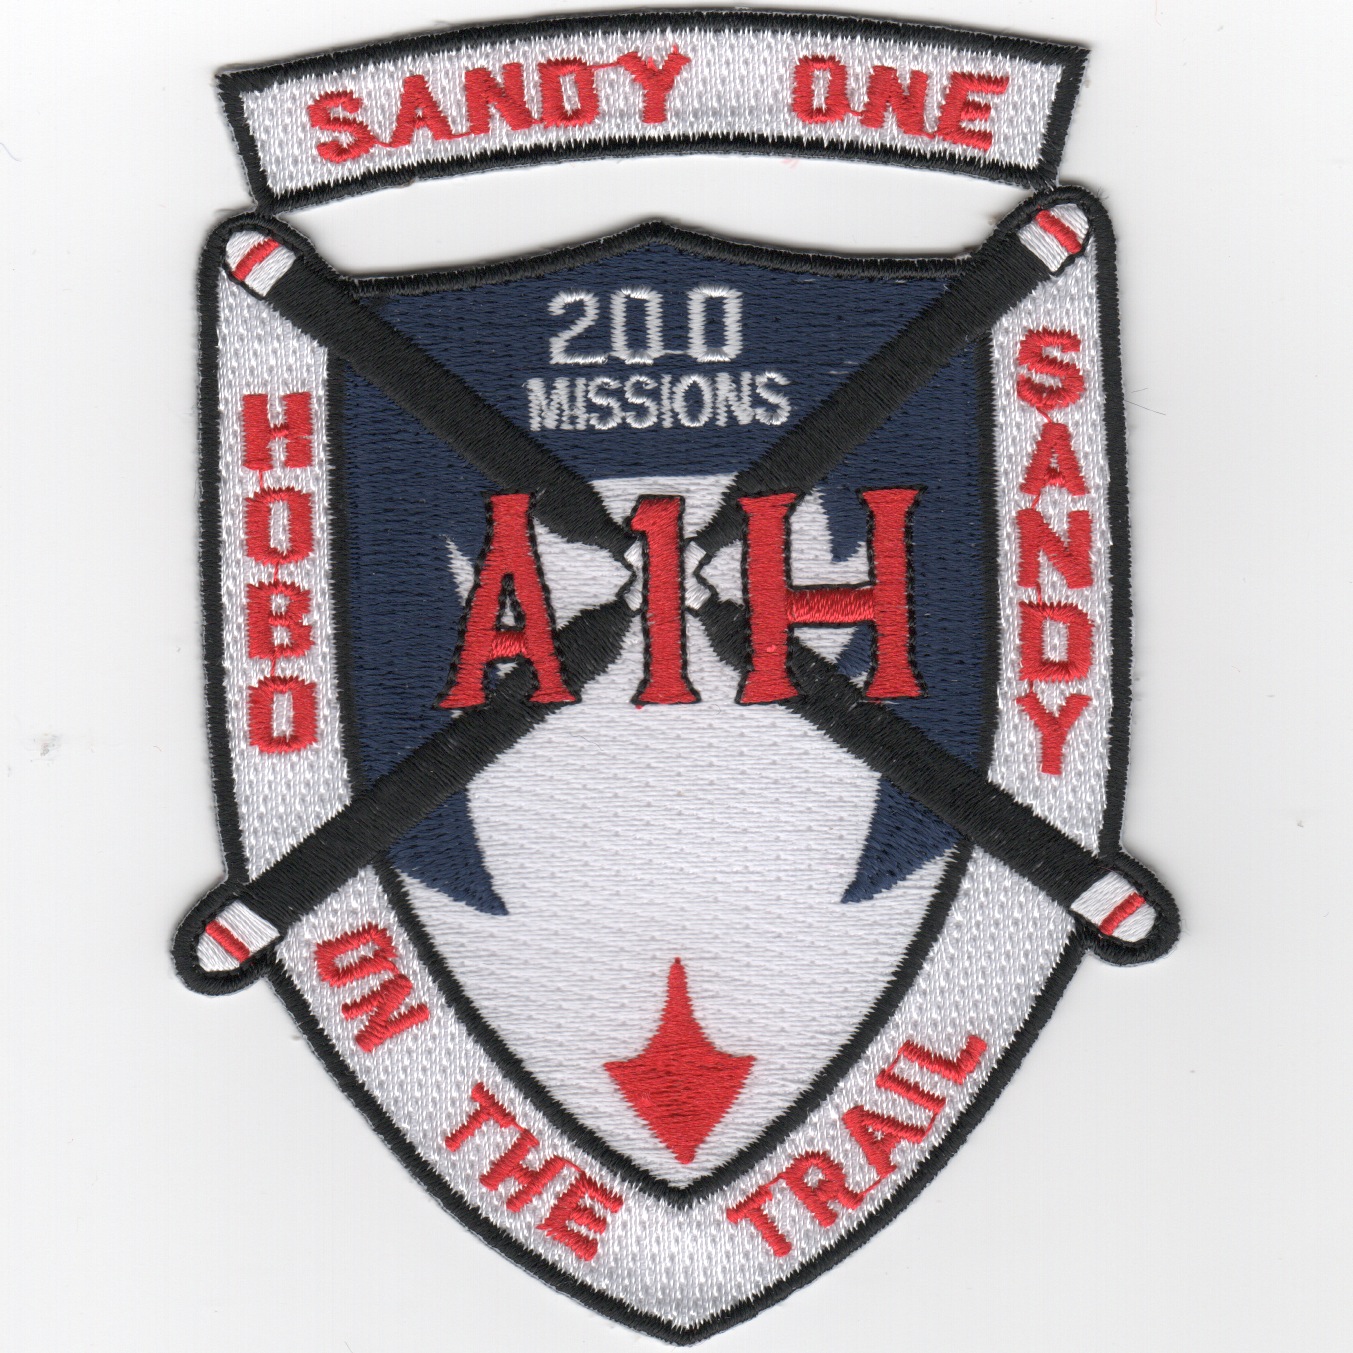 A-1H 'SANDY ONE' 200 Missions Patch